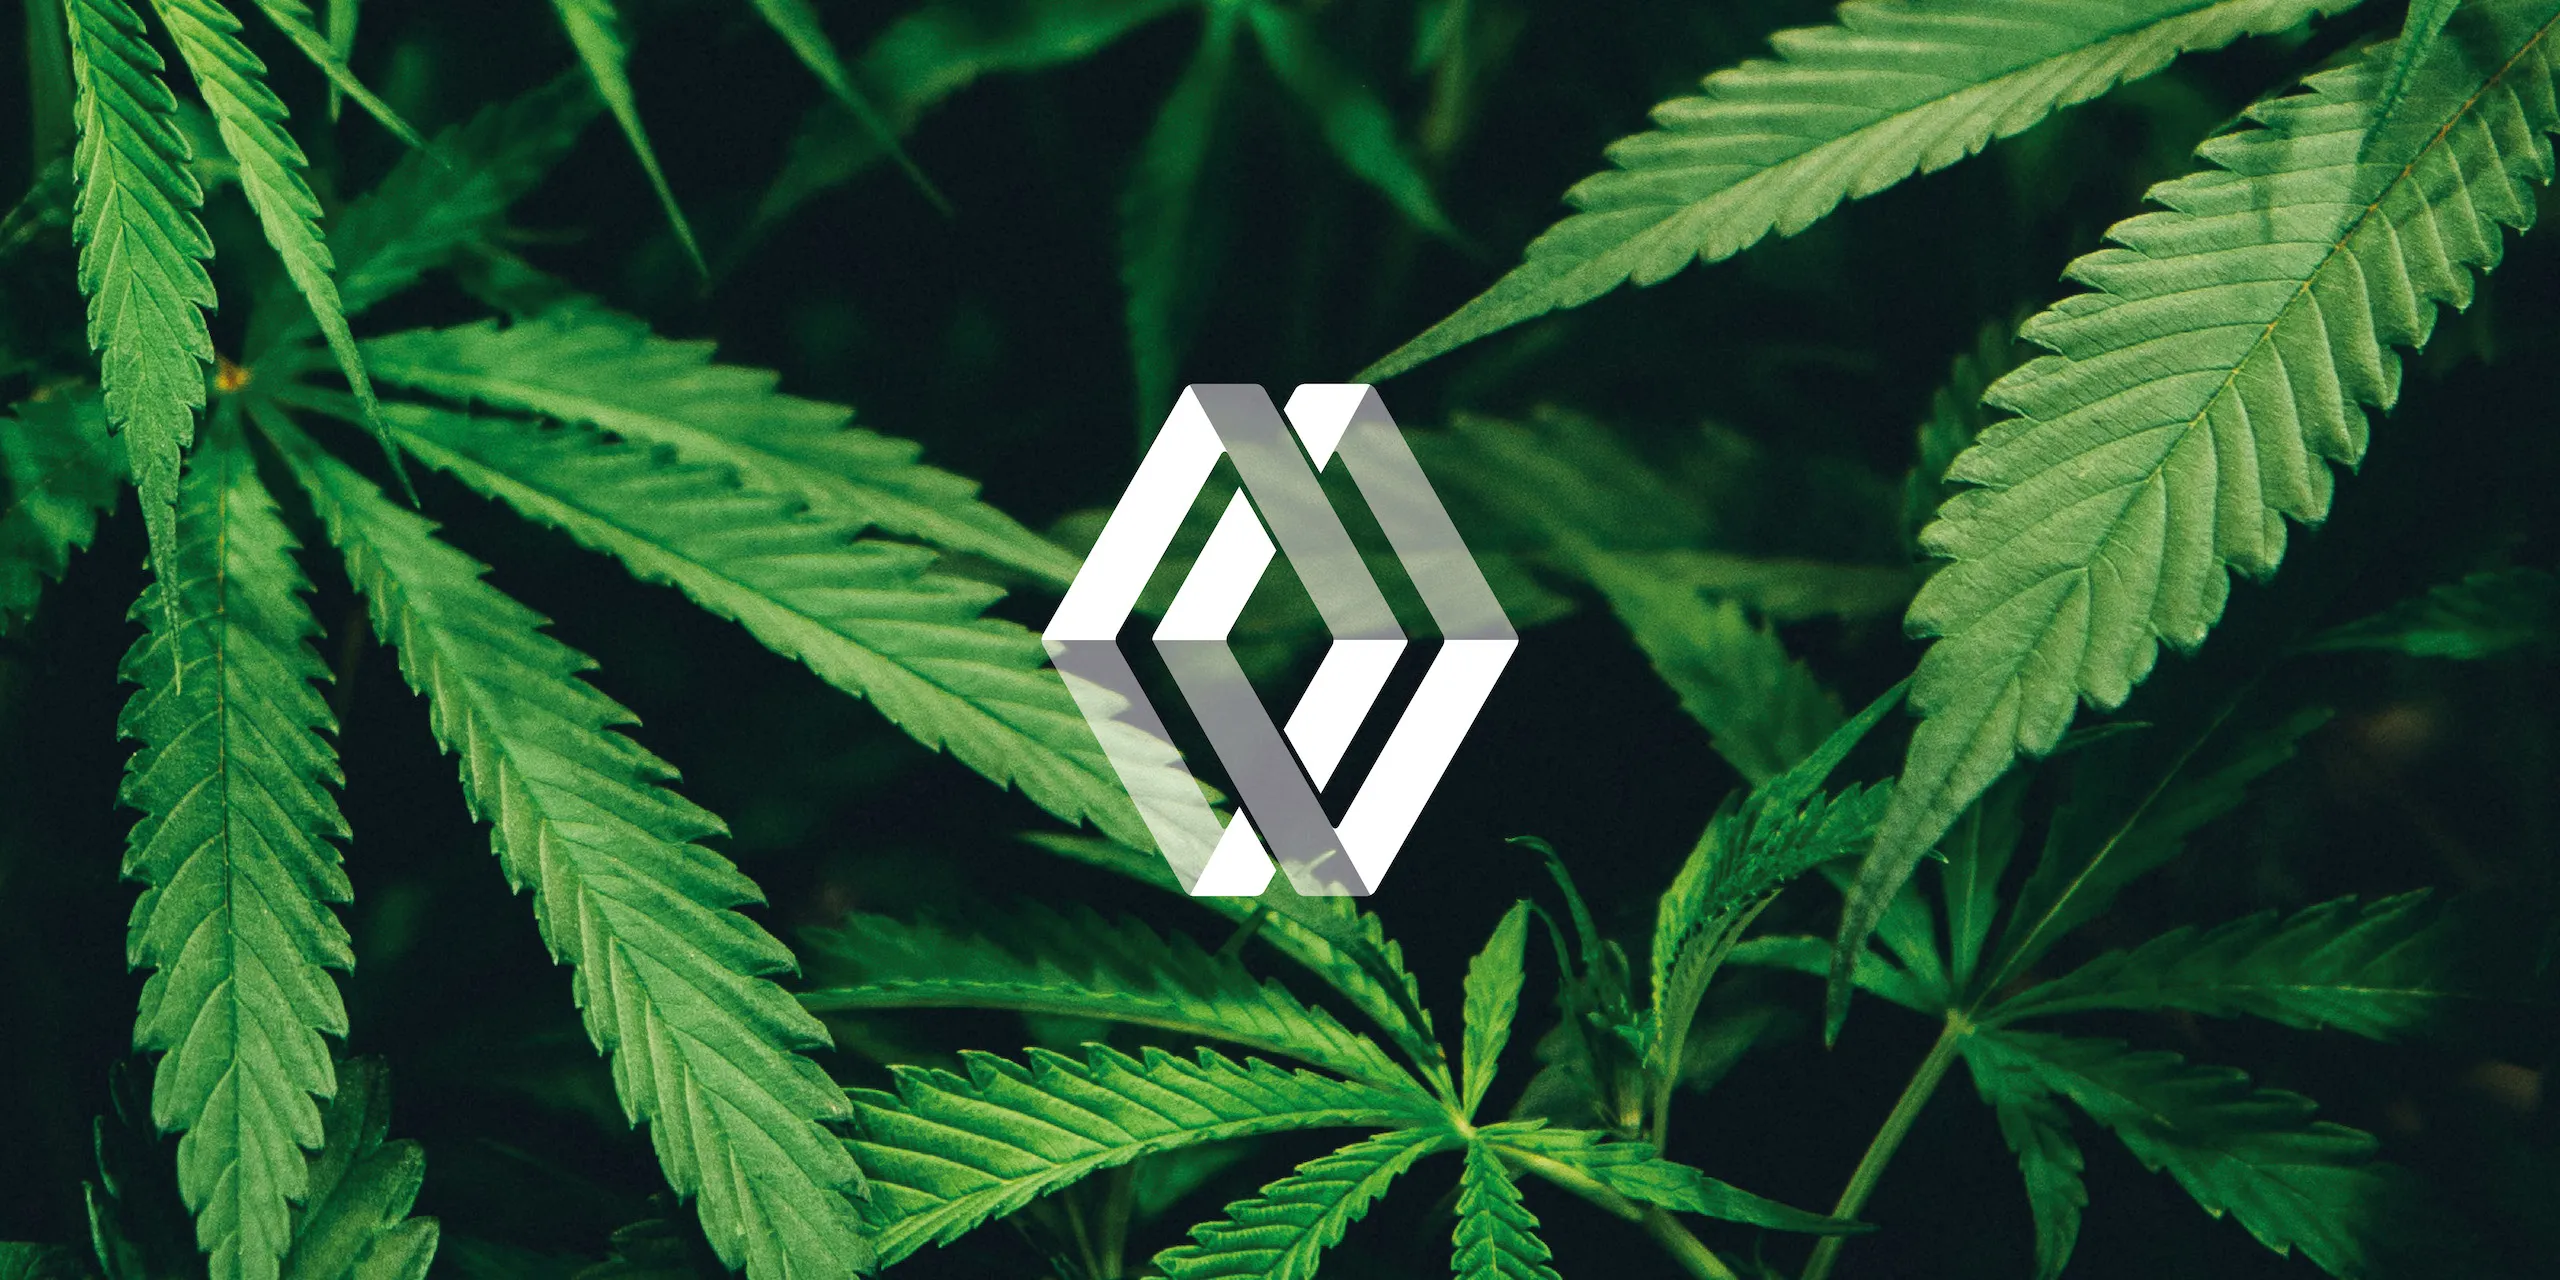 Arelant double diamond logo in white against a background of green cannabis leaves